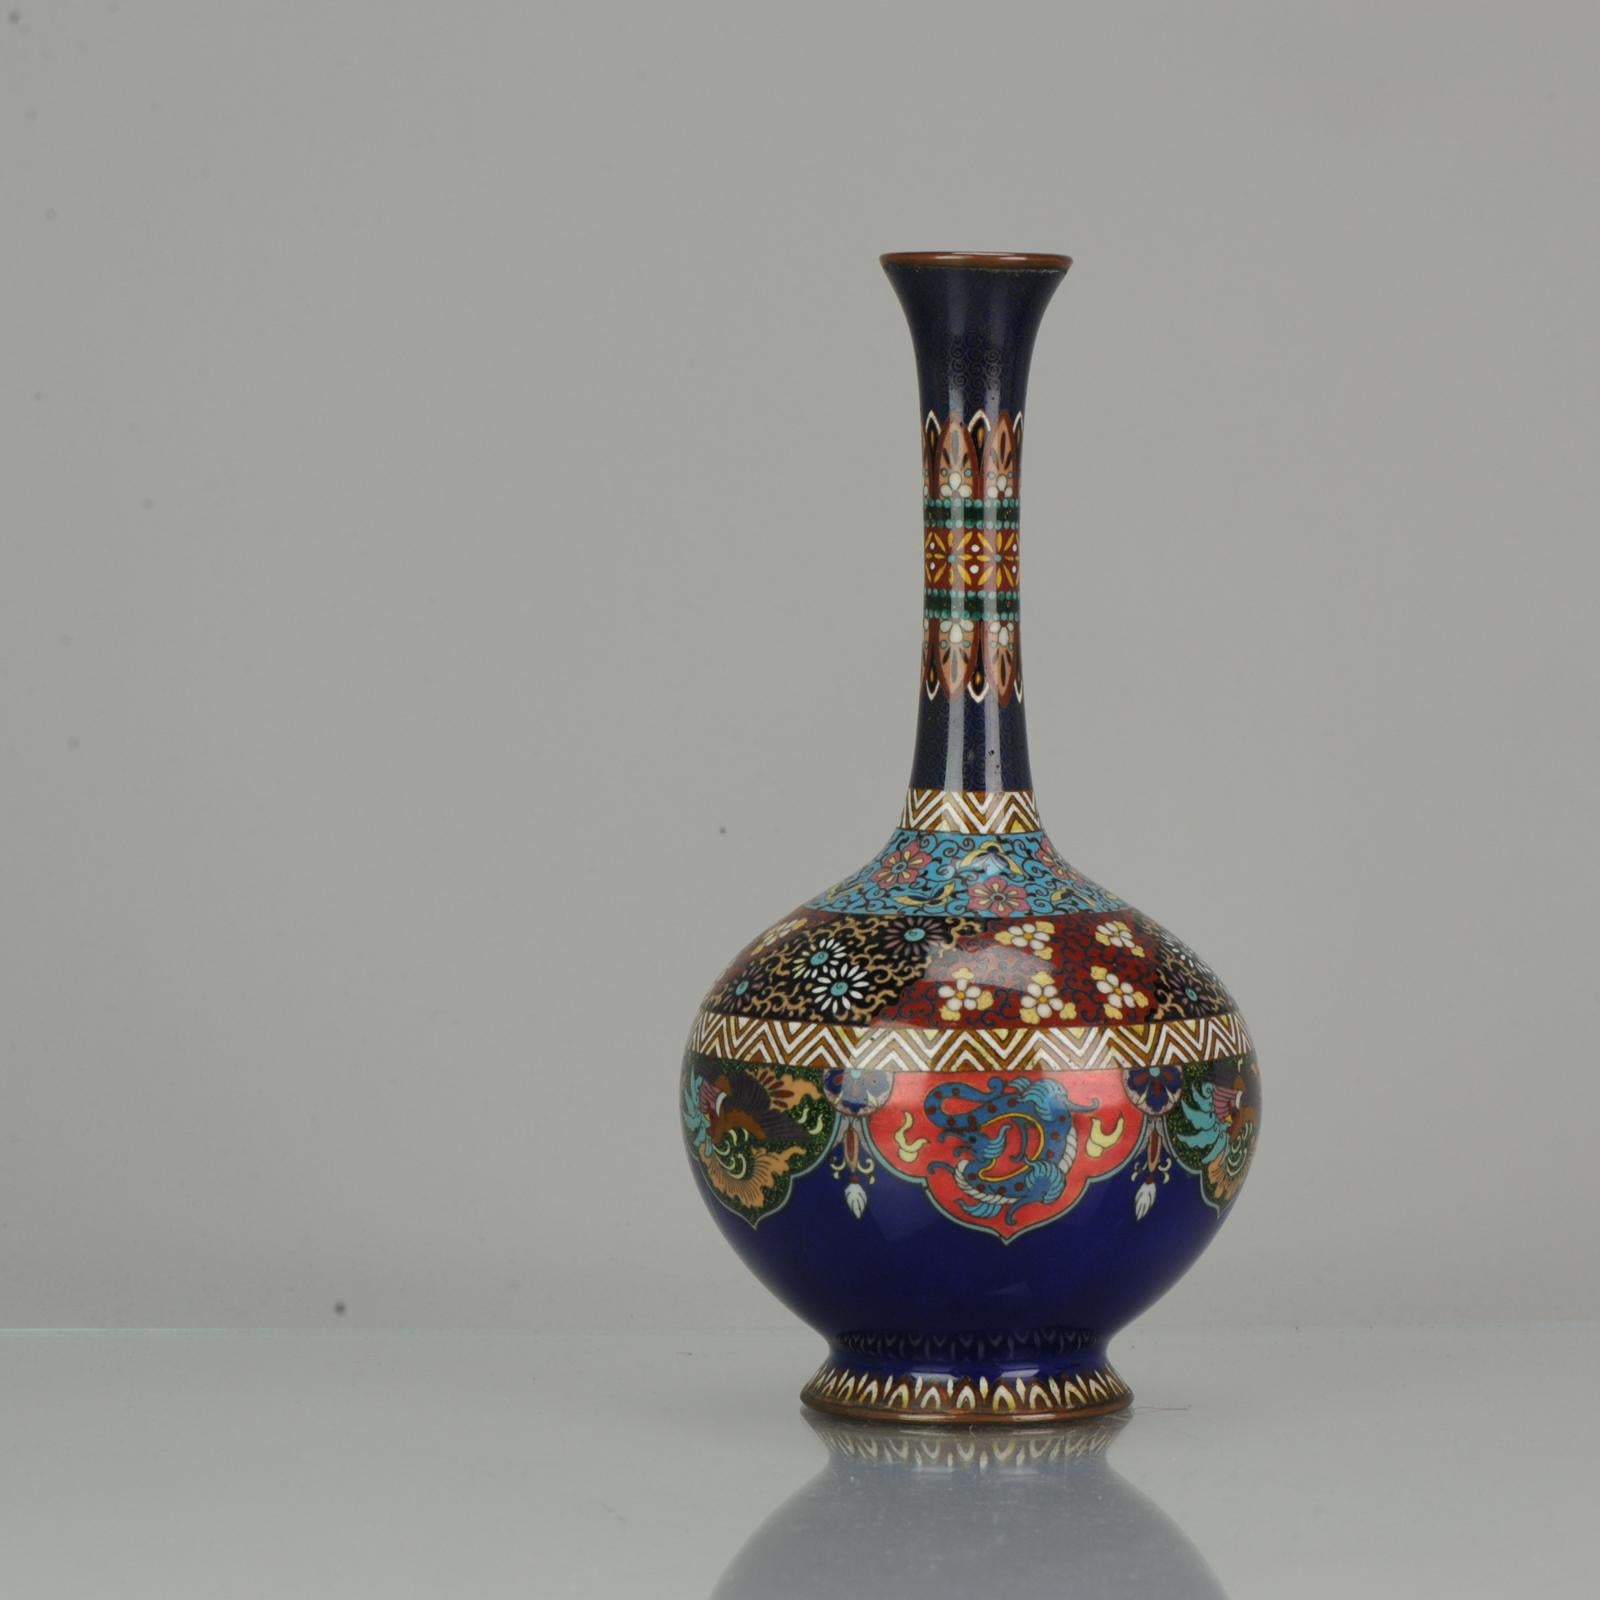 Lovely and beautifully made piece. With a stunning scene of a Phoenixes and Dragons.

Cloisonné is a way of enamelling an object, (typically made of copper) whereby fine wires are used to delineate the decorative areas (cloisons in French, hence